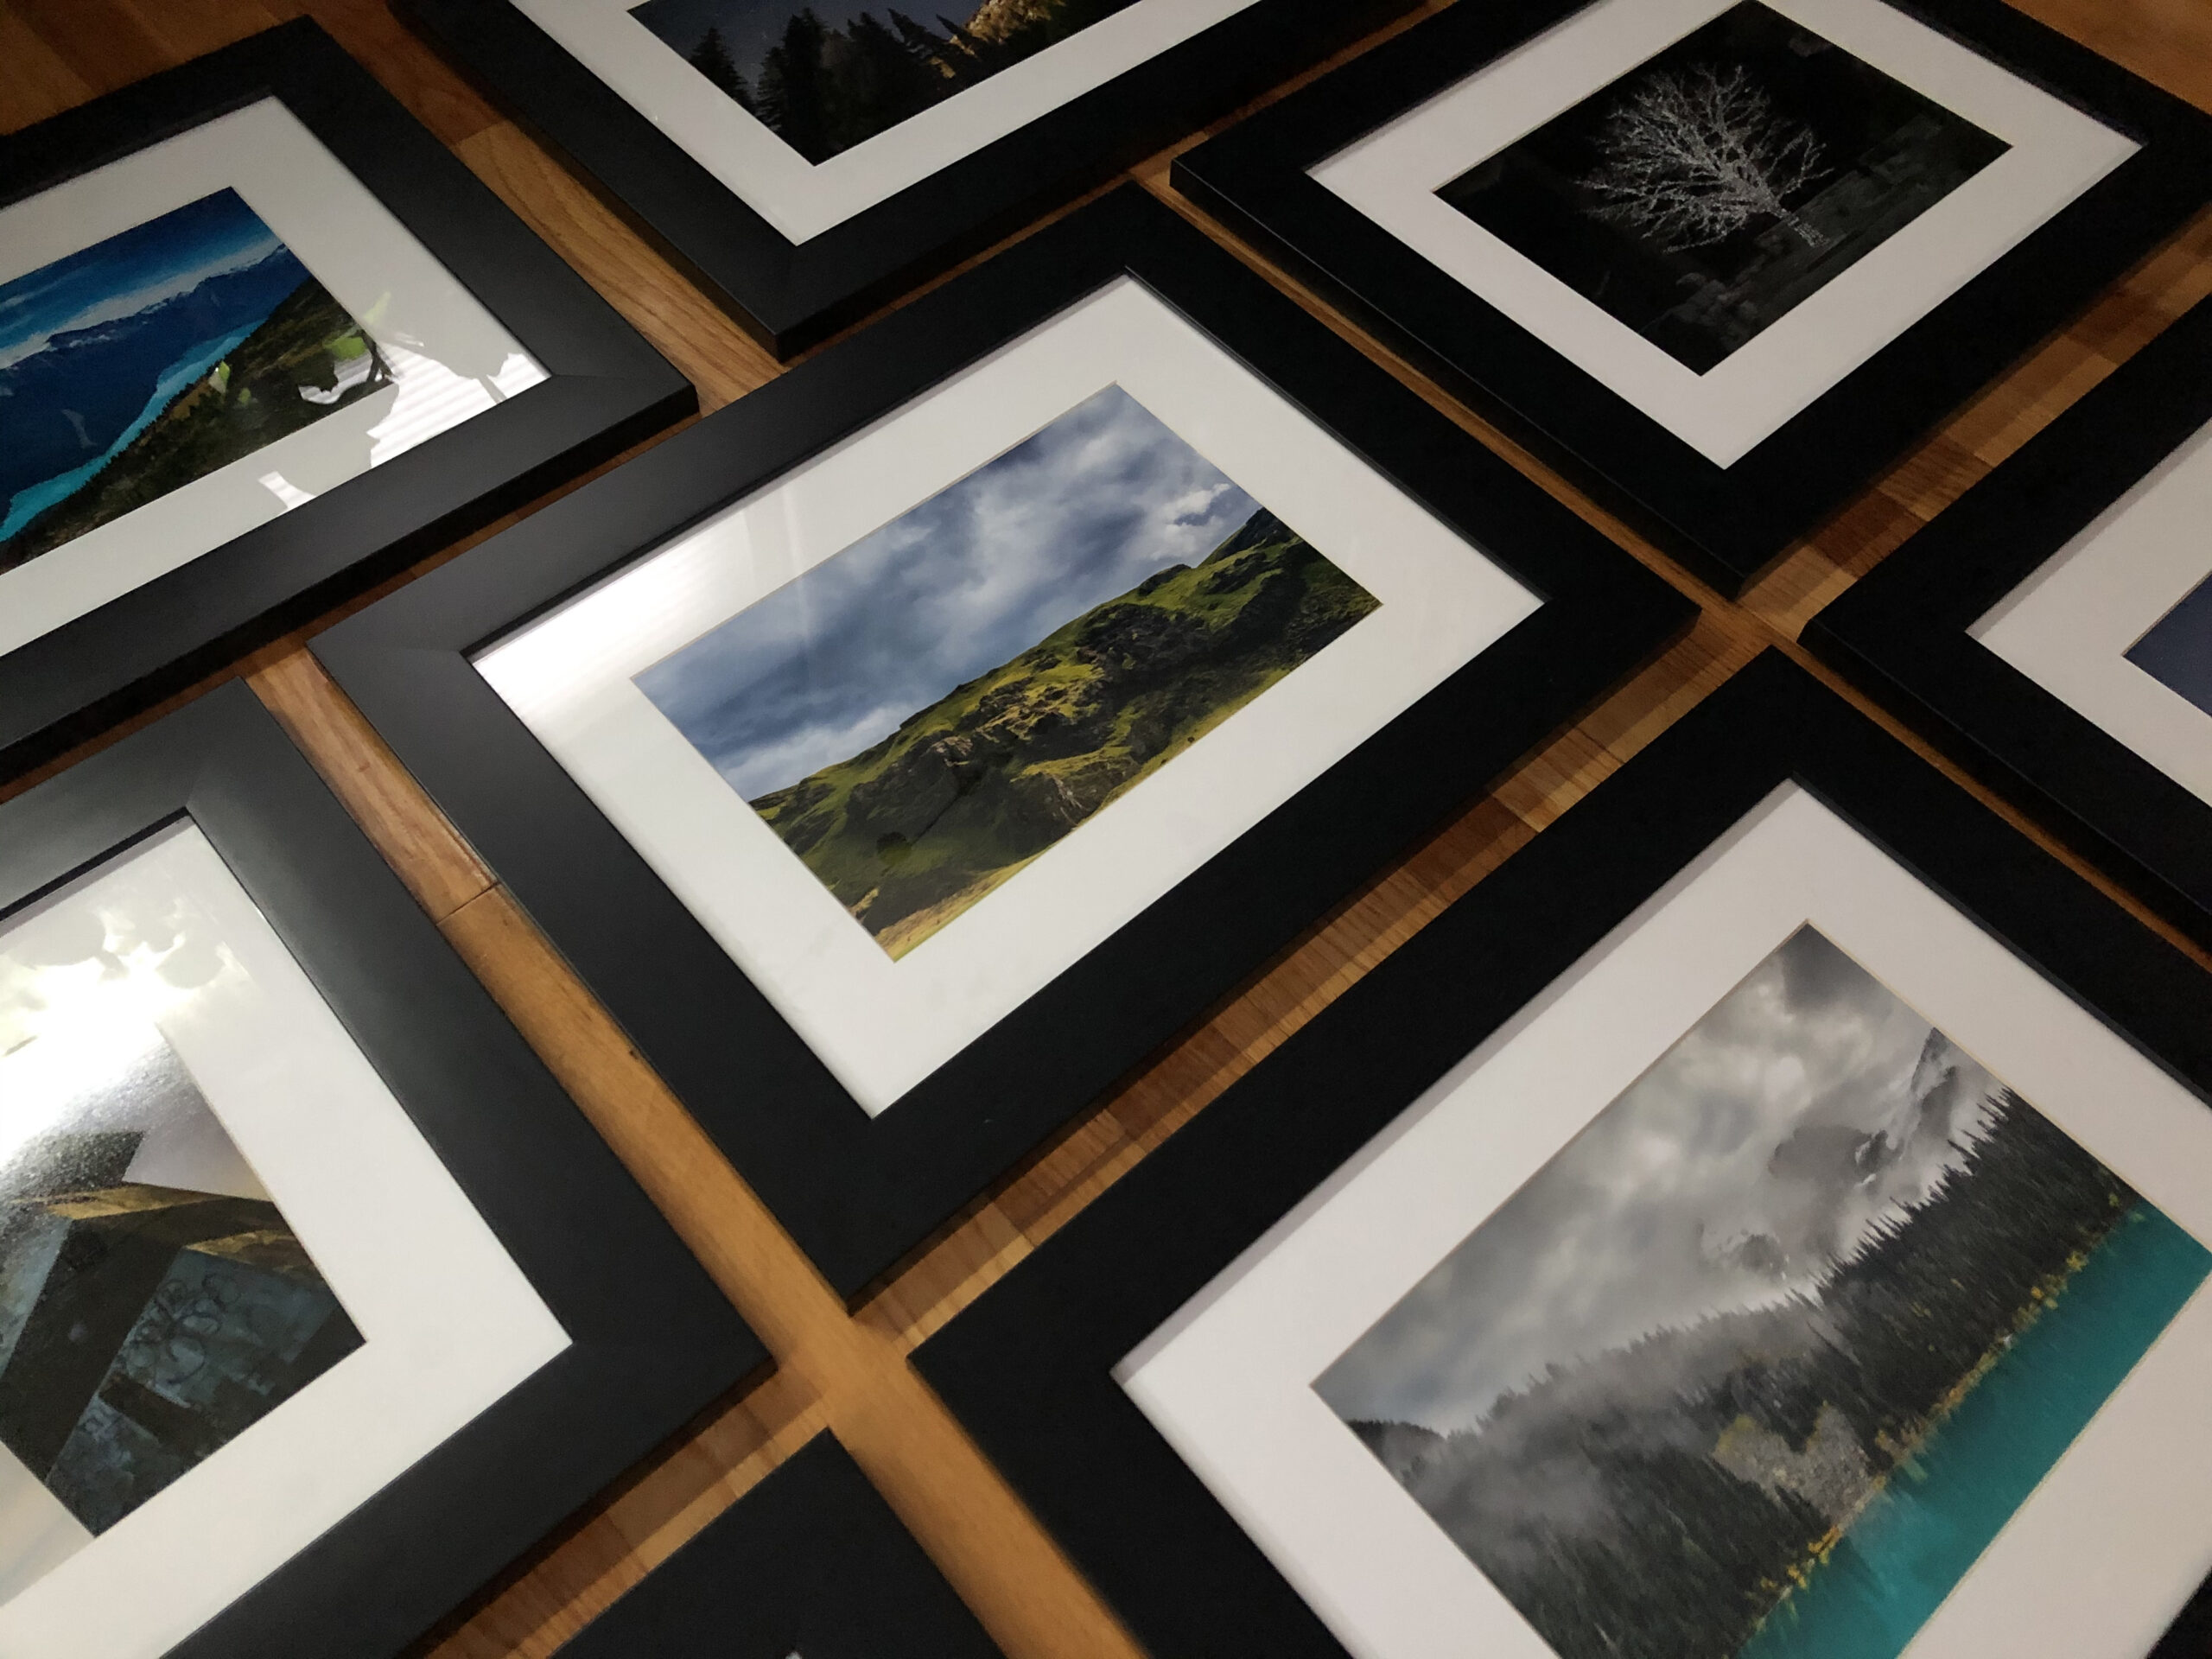 Printed and framed photo samples